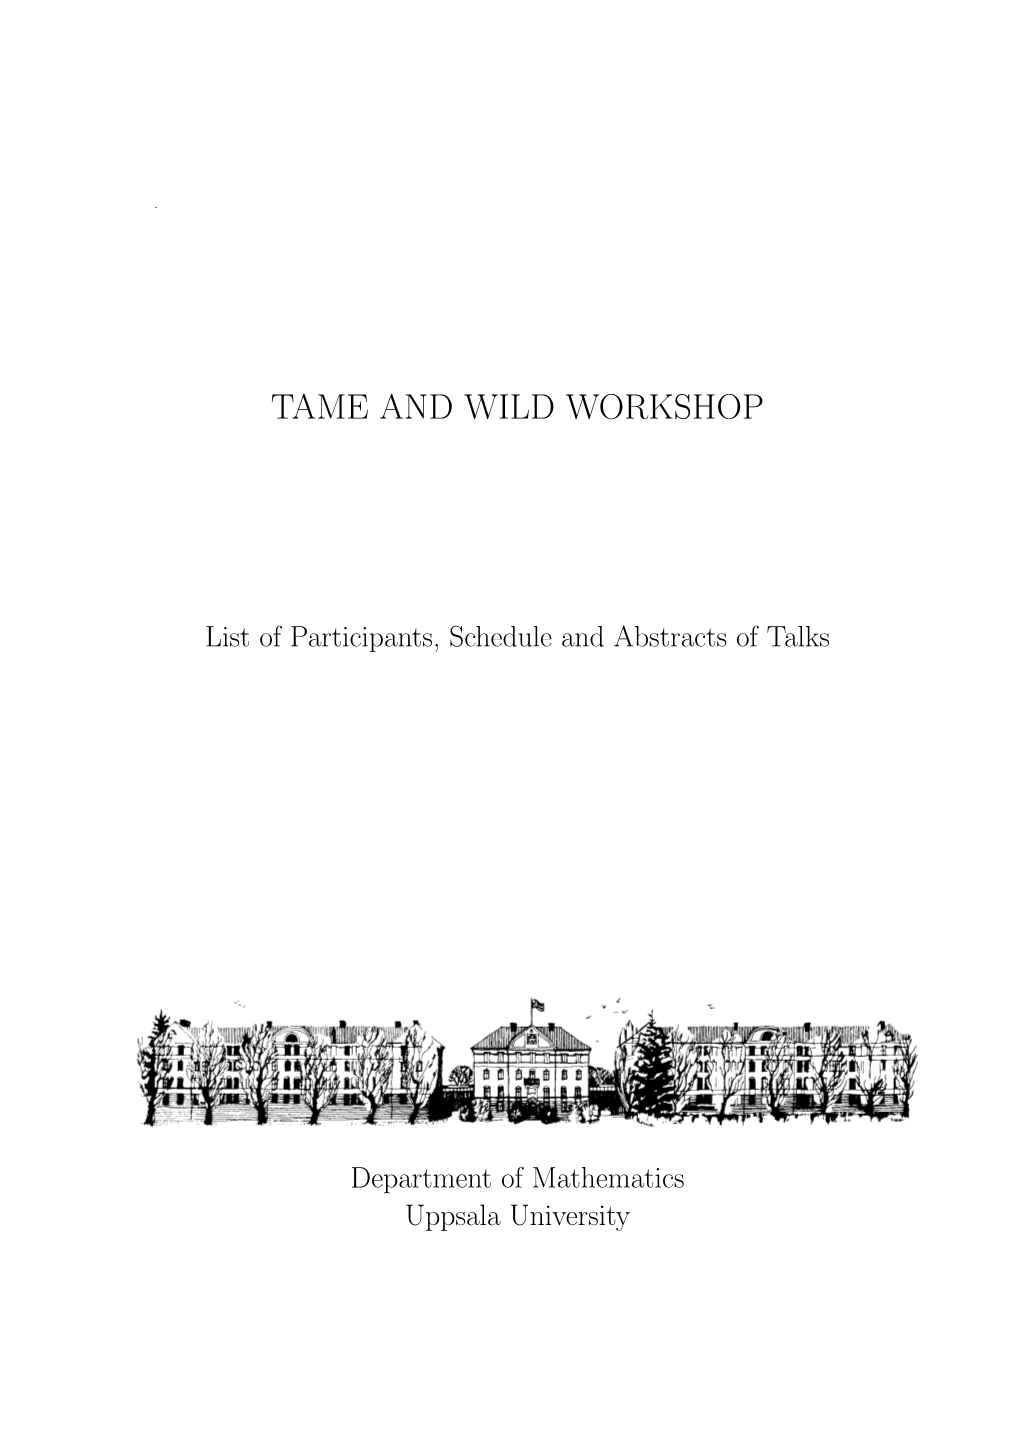 Tame and Wild Workshop